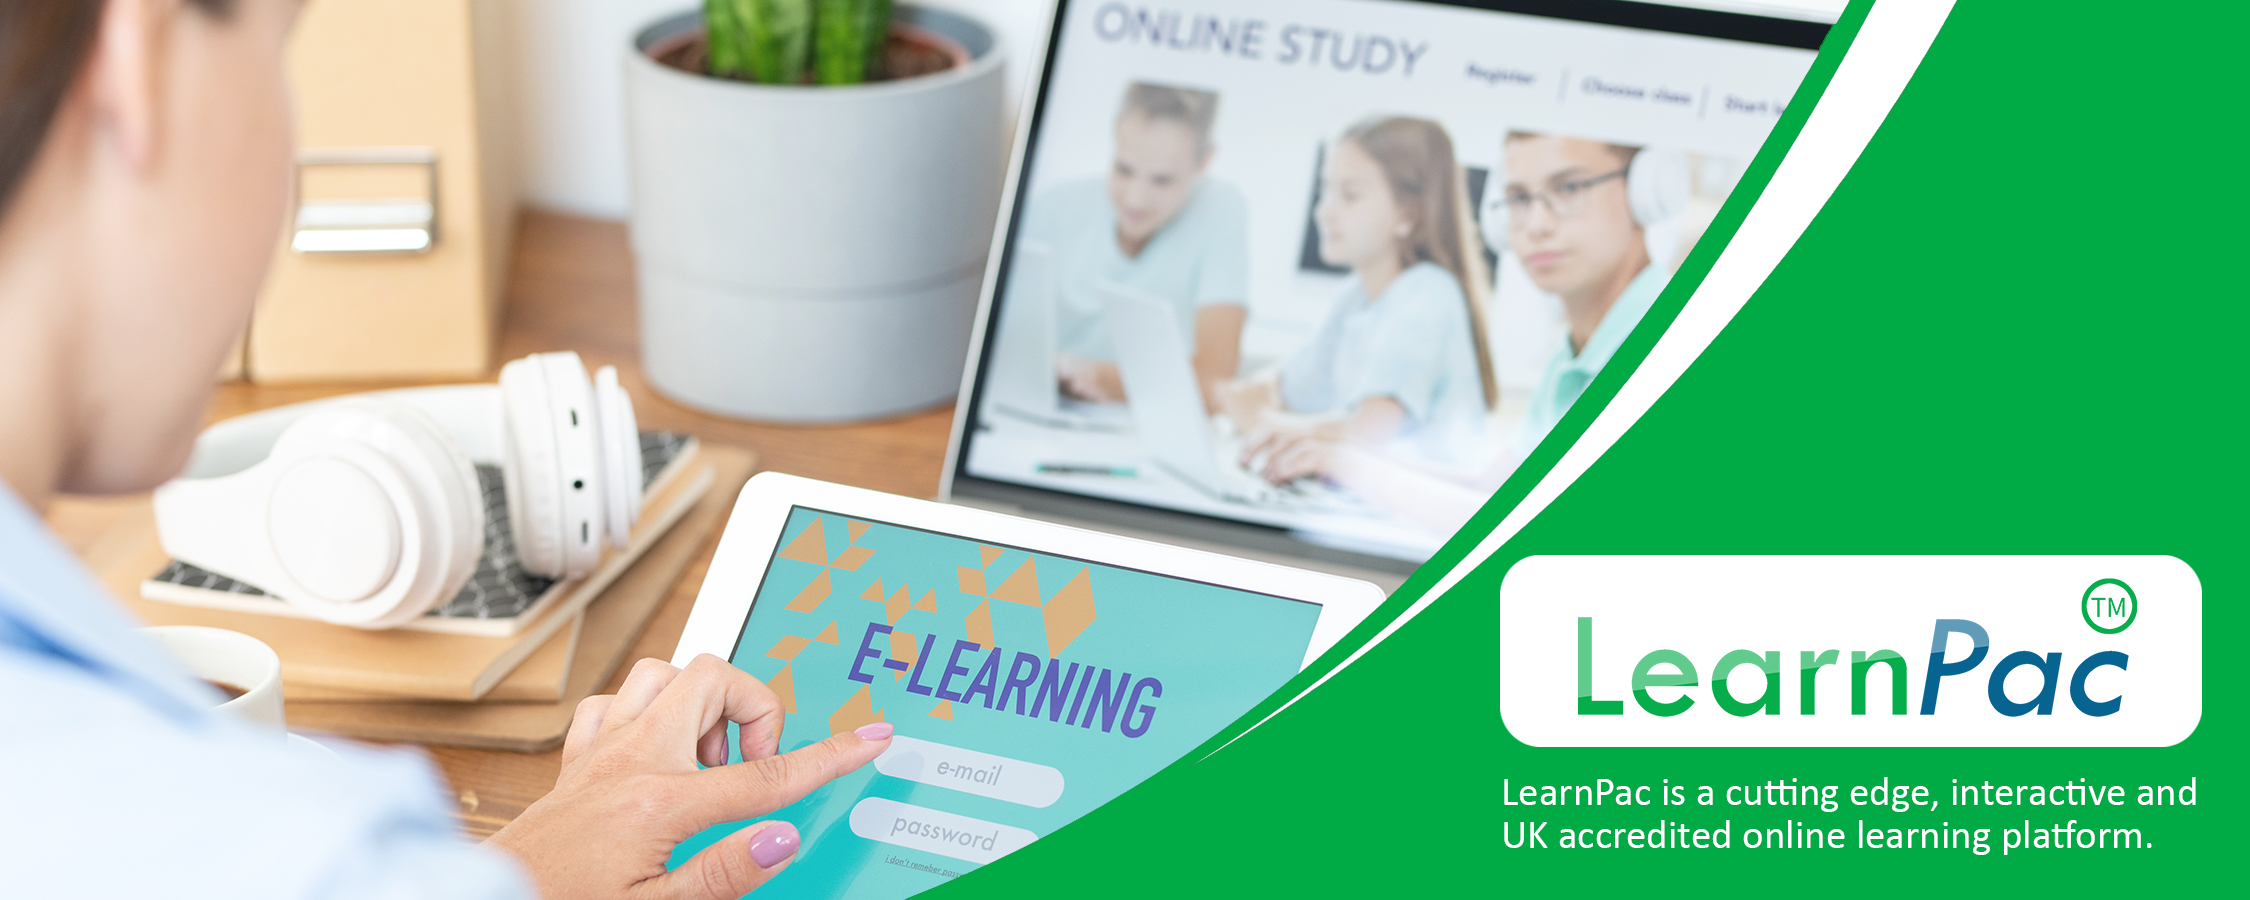 Understanding and Using Inclusive Teaching and Learning Approaches in Education and Training - Level 3 - Online Learning Courses - E-Learning Courses - LearnPac Systems UK -